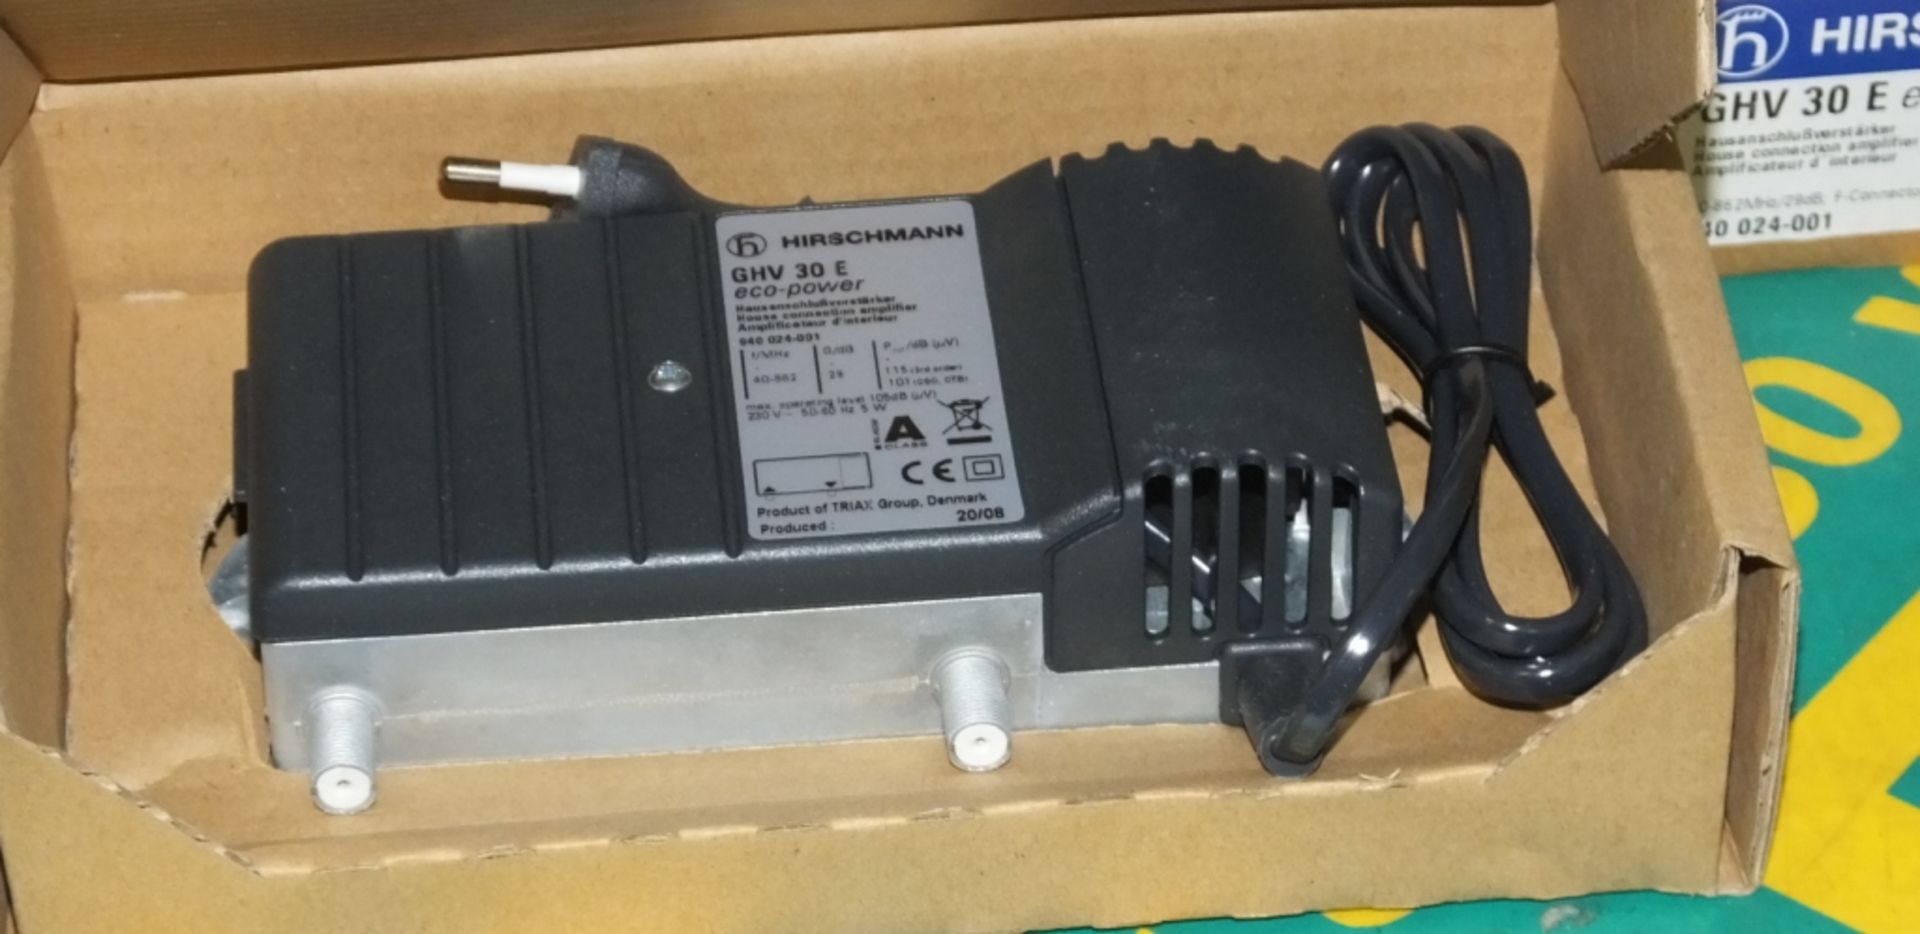 10x GHV 30-E Connection Amplifier Units - Image 2 of 2